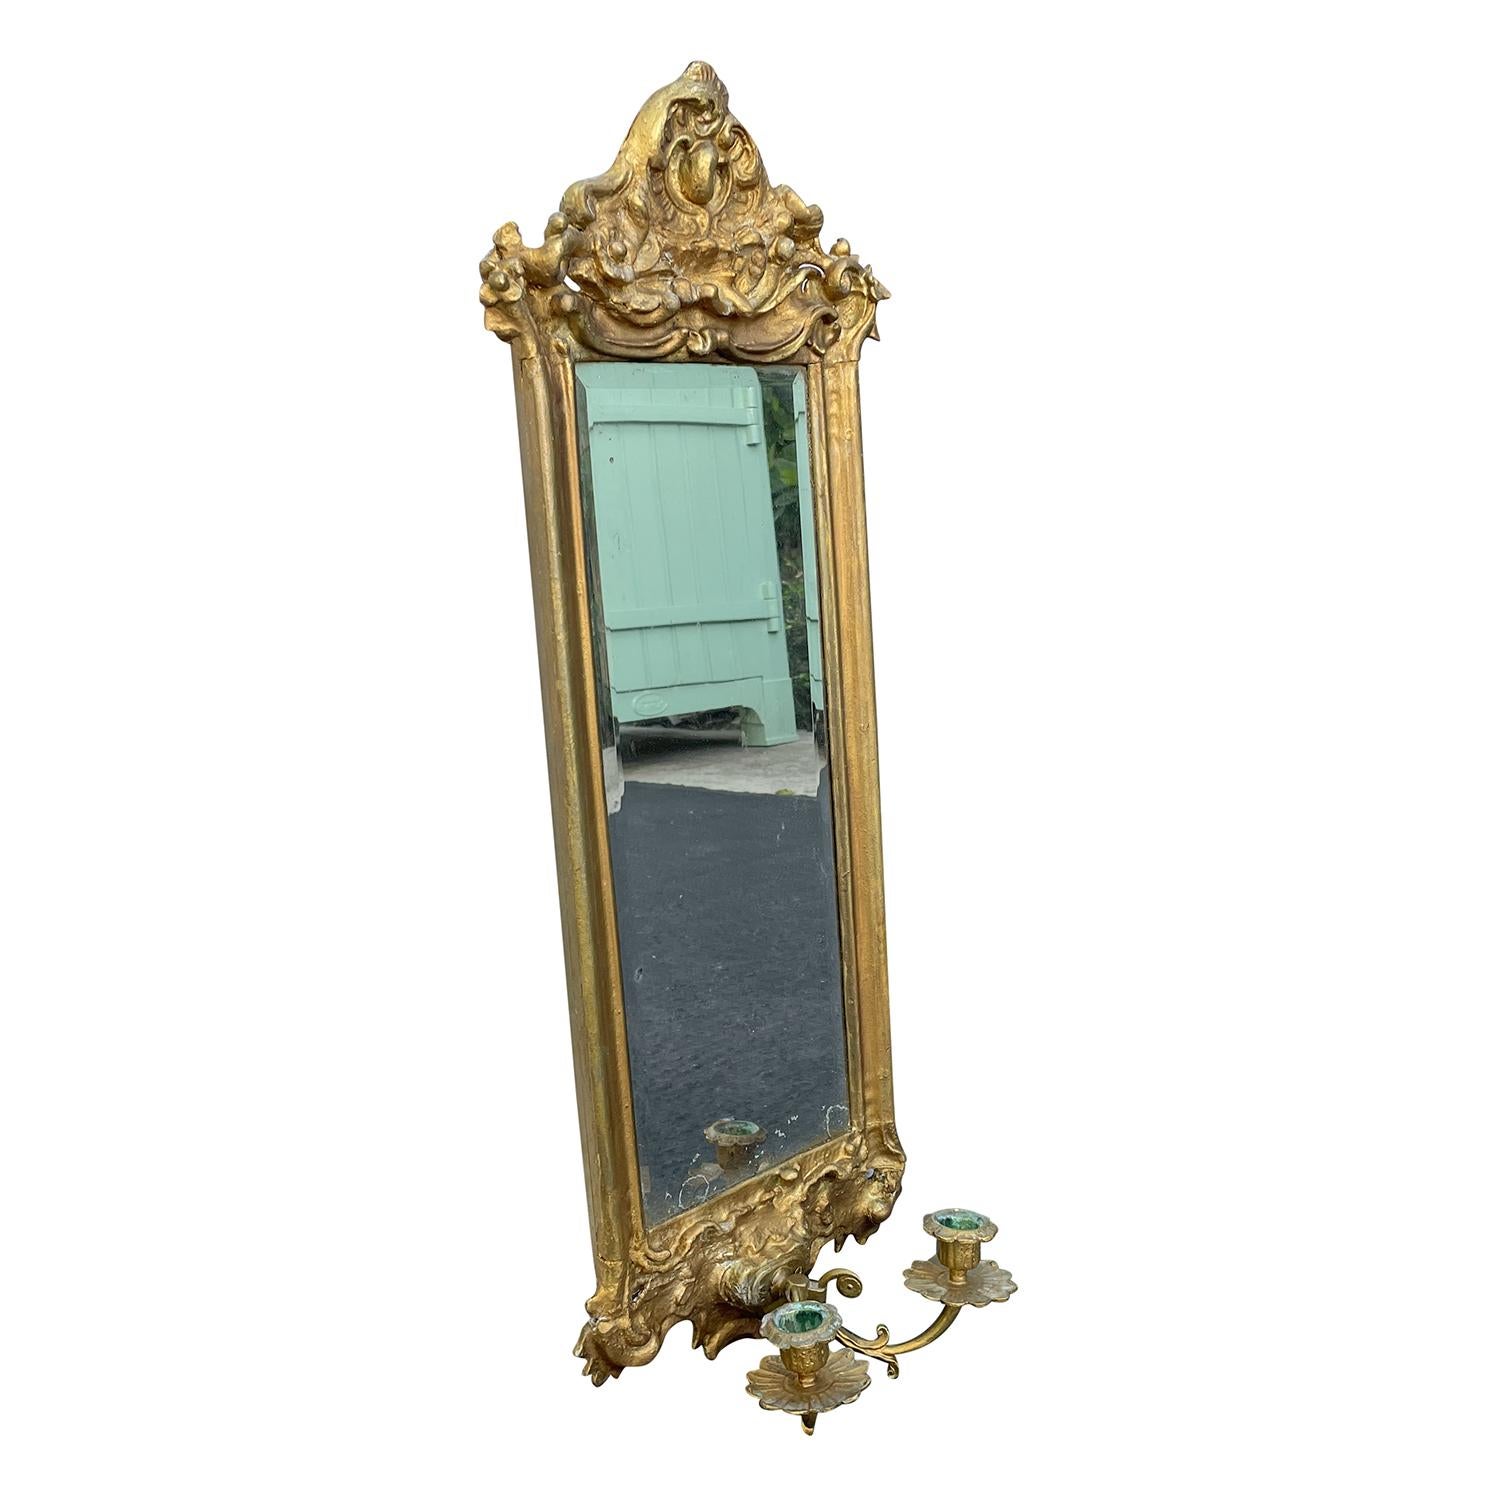 A gold, antique Swedish Gustavian pair of wall mirrors made of hand crafted gilded wood with its original mirrored glass, in good condition. The Scandinavian wall décor pieces are composed with two candle holders, sticks enhanced by detailed wood